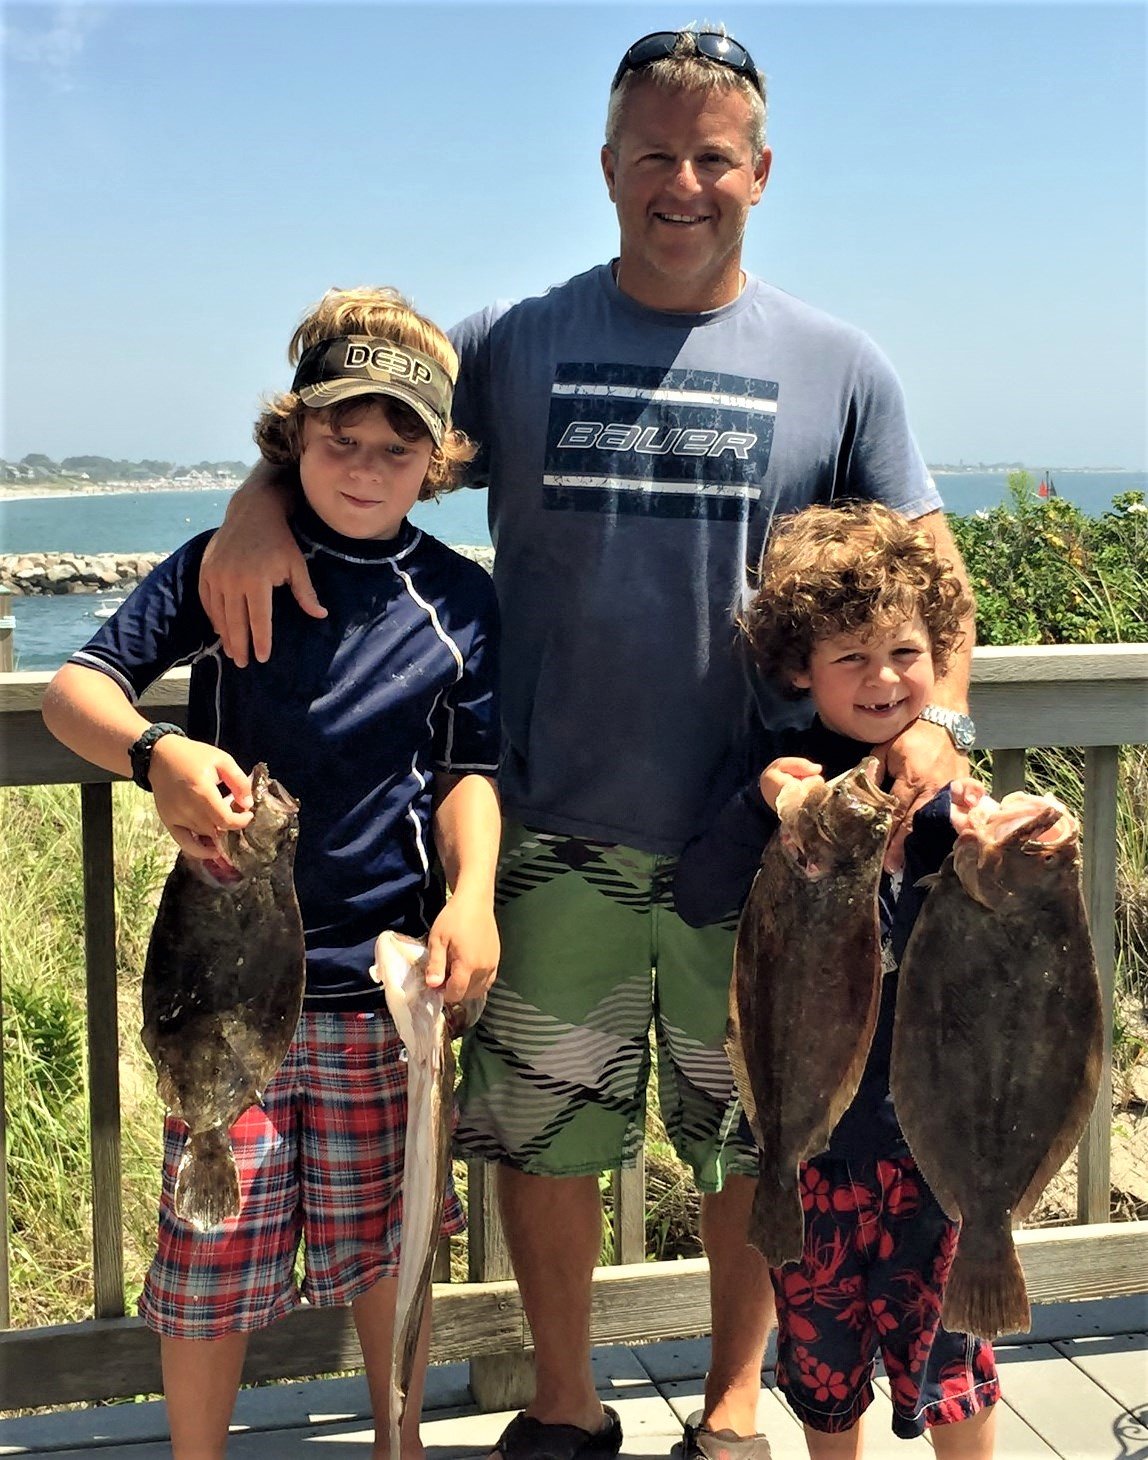 Bluefin magic: In 2016 Jude (nine) and Rowan (six) with father Jimmy Monti of Warwick with summer flounder. This weekend, five years later, the trio landed bluefin tuna. Rowan (now eleven) said, “I only want to fish for bluefin tuna for the rest of my life.”